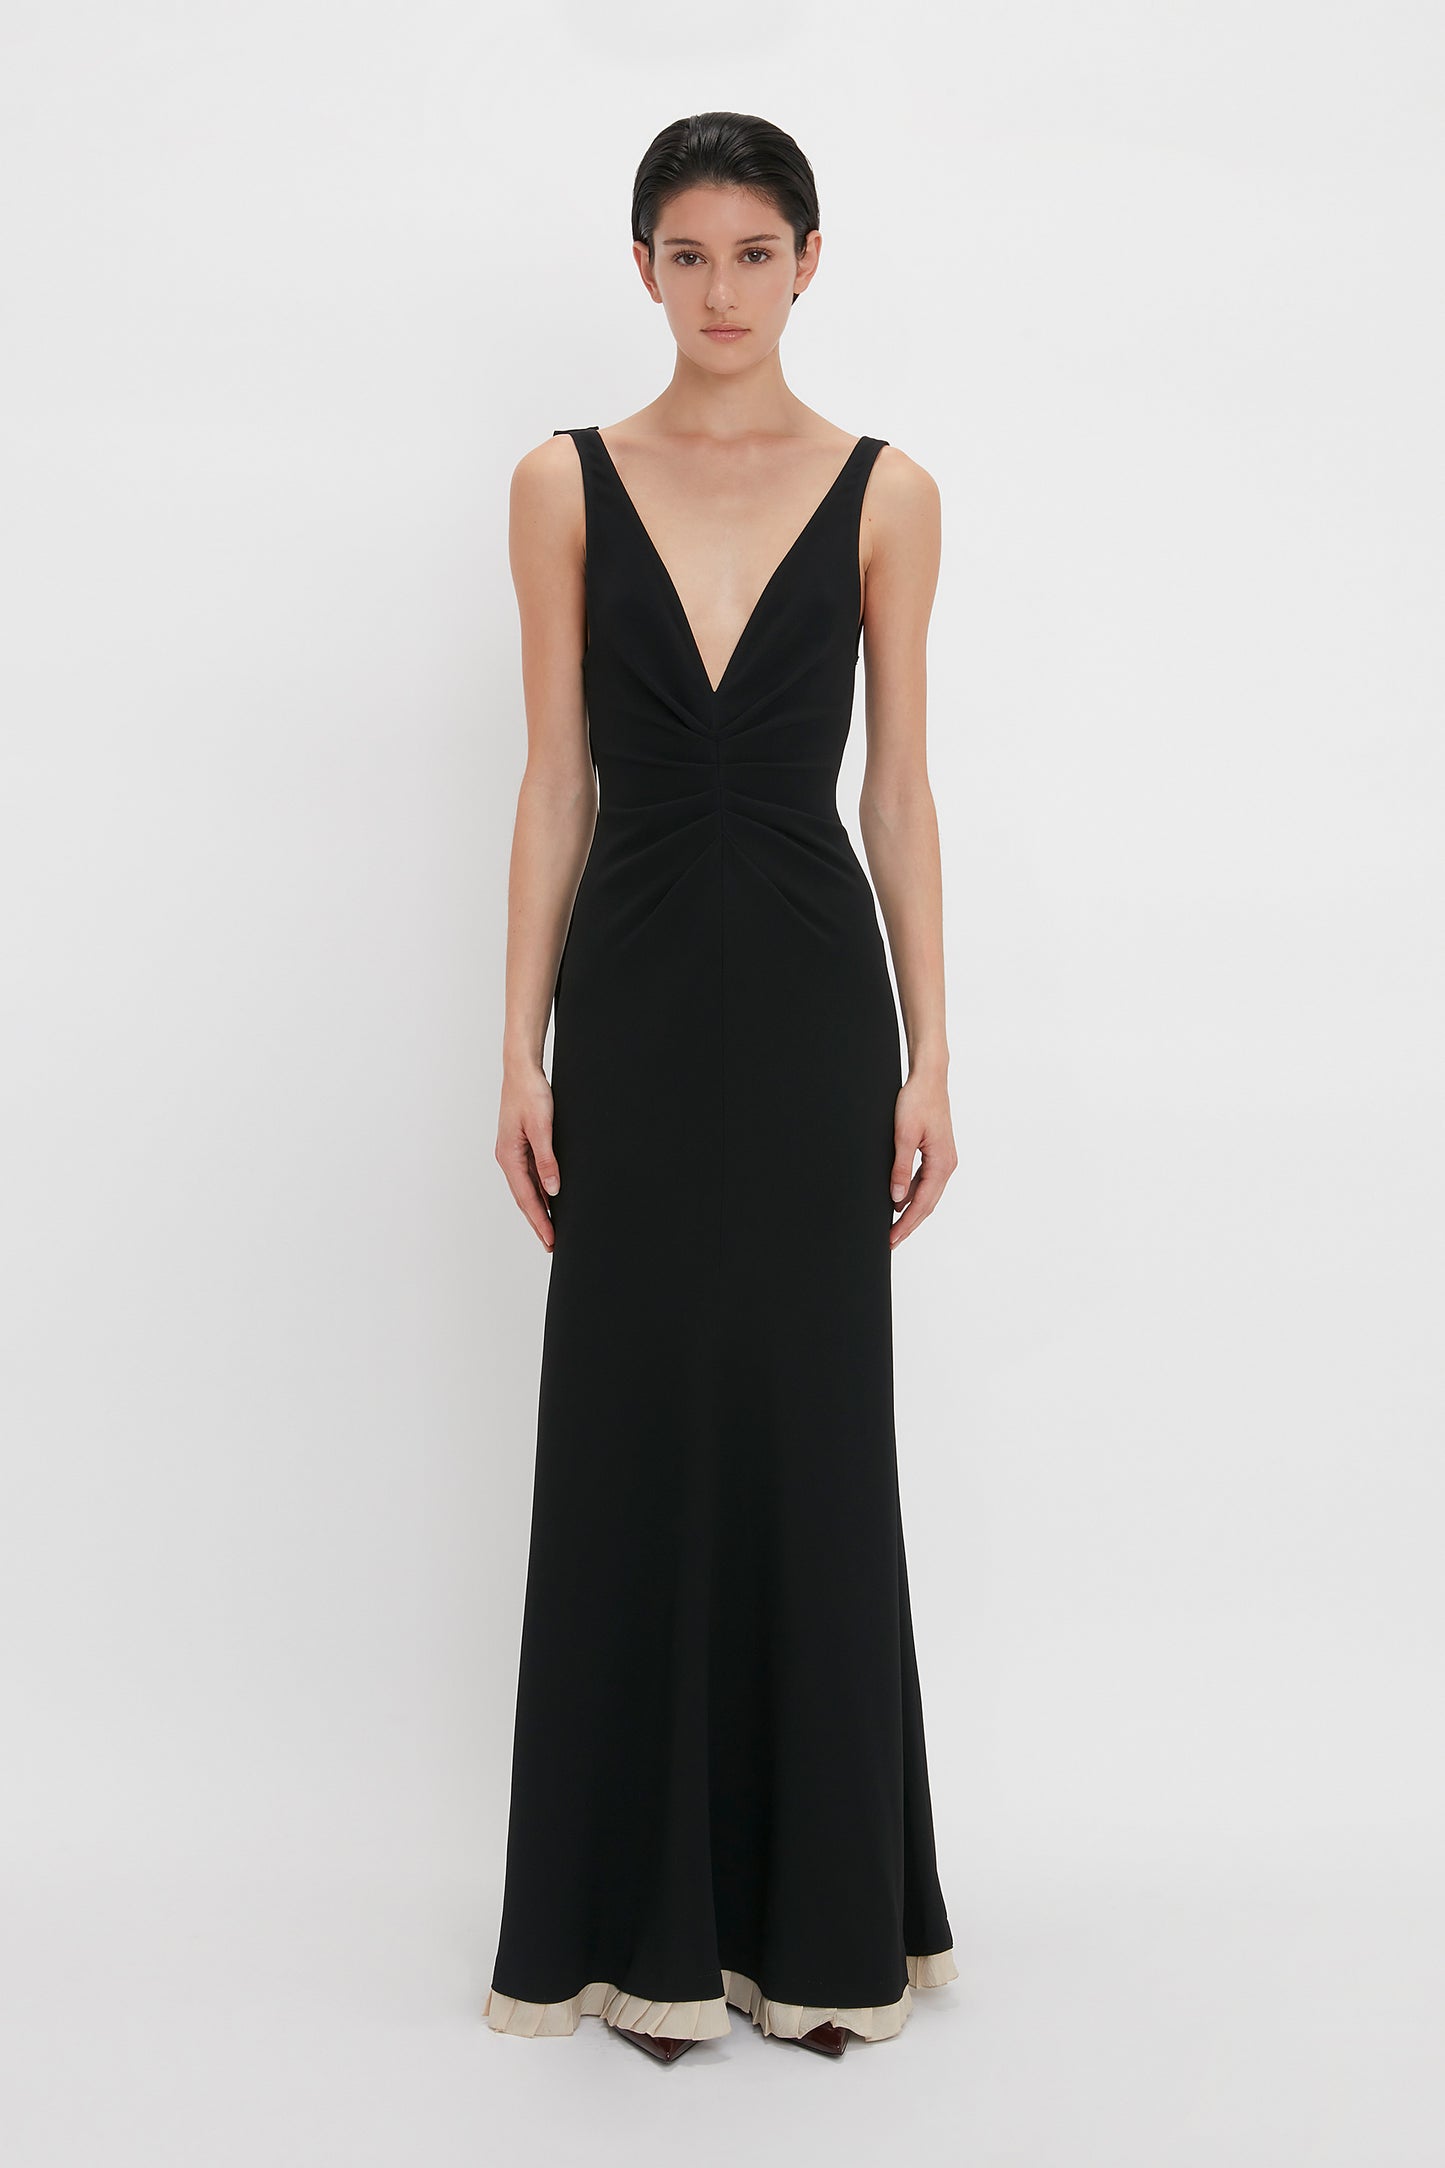 A person wearing the Victoria Beckham V-Neck Gathered Waist Floor-Length Gown In Black.